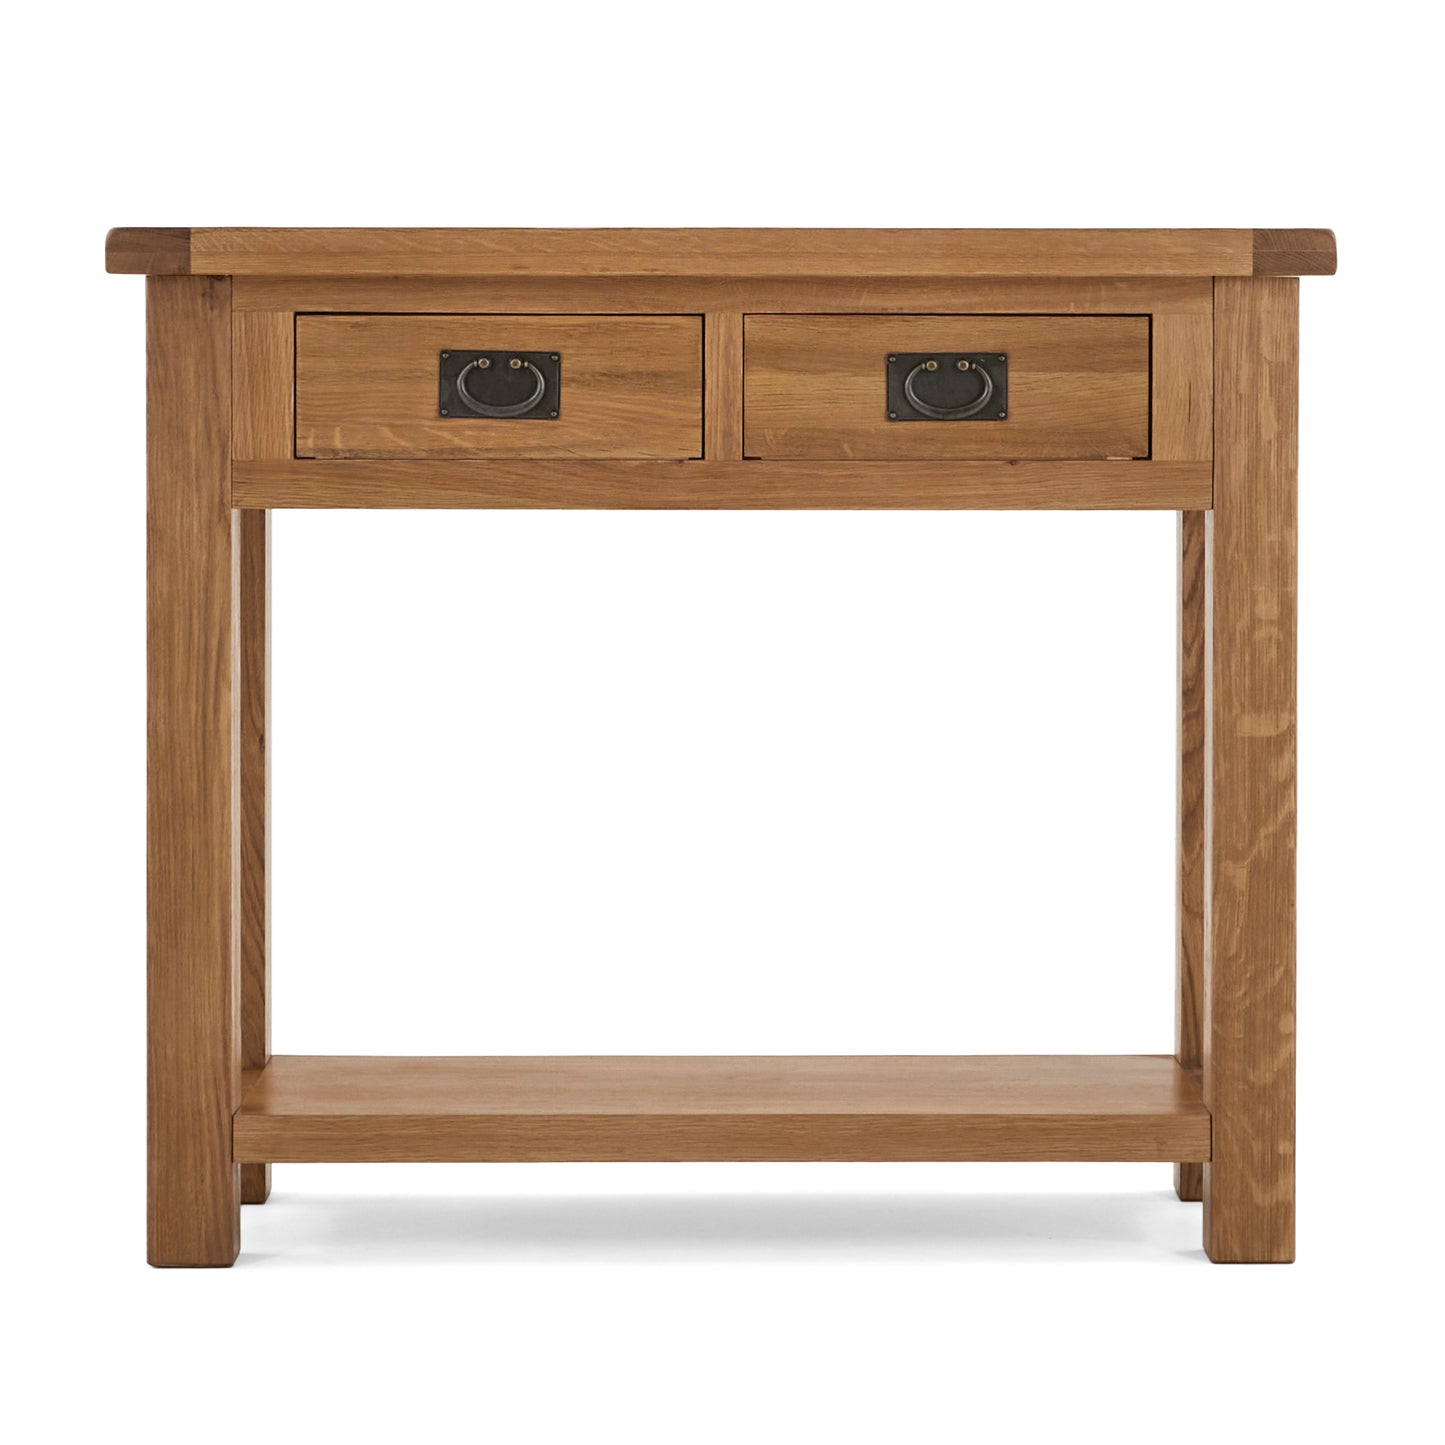 Sussex Oak Console Hall Table with Drawers